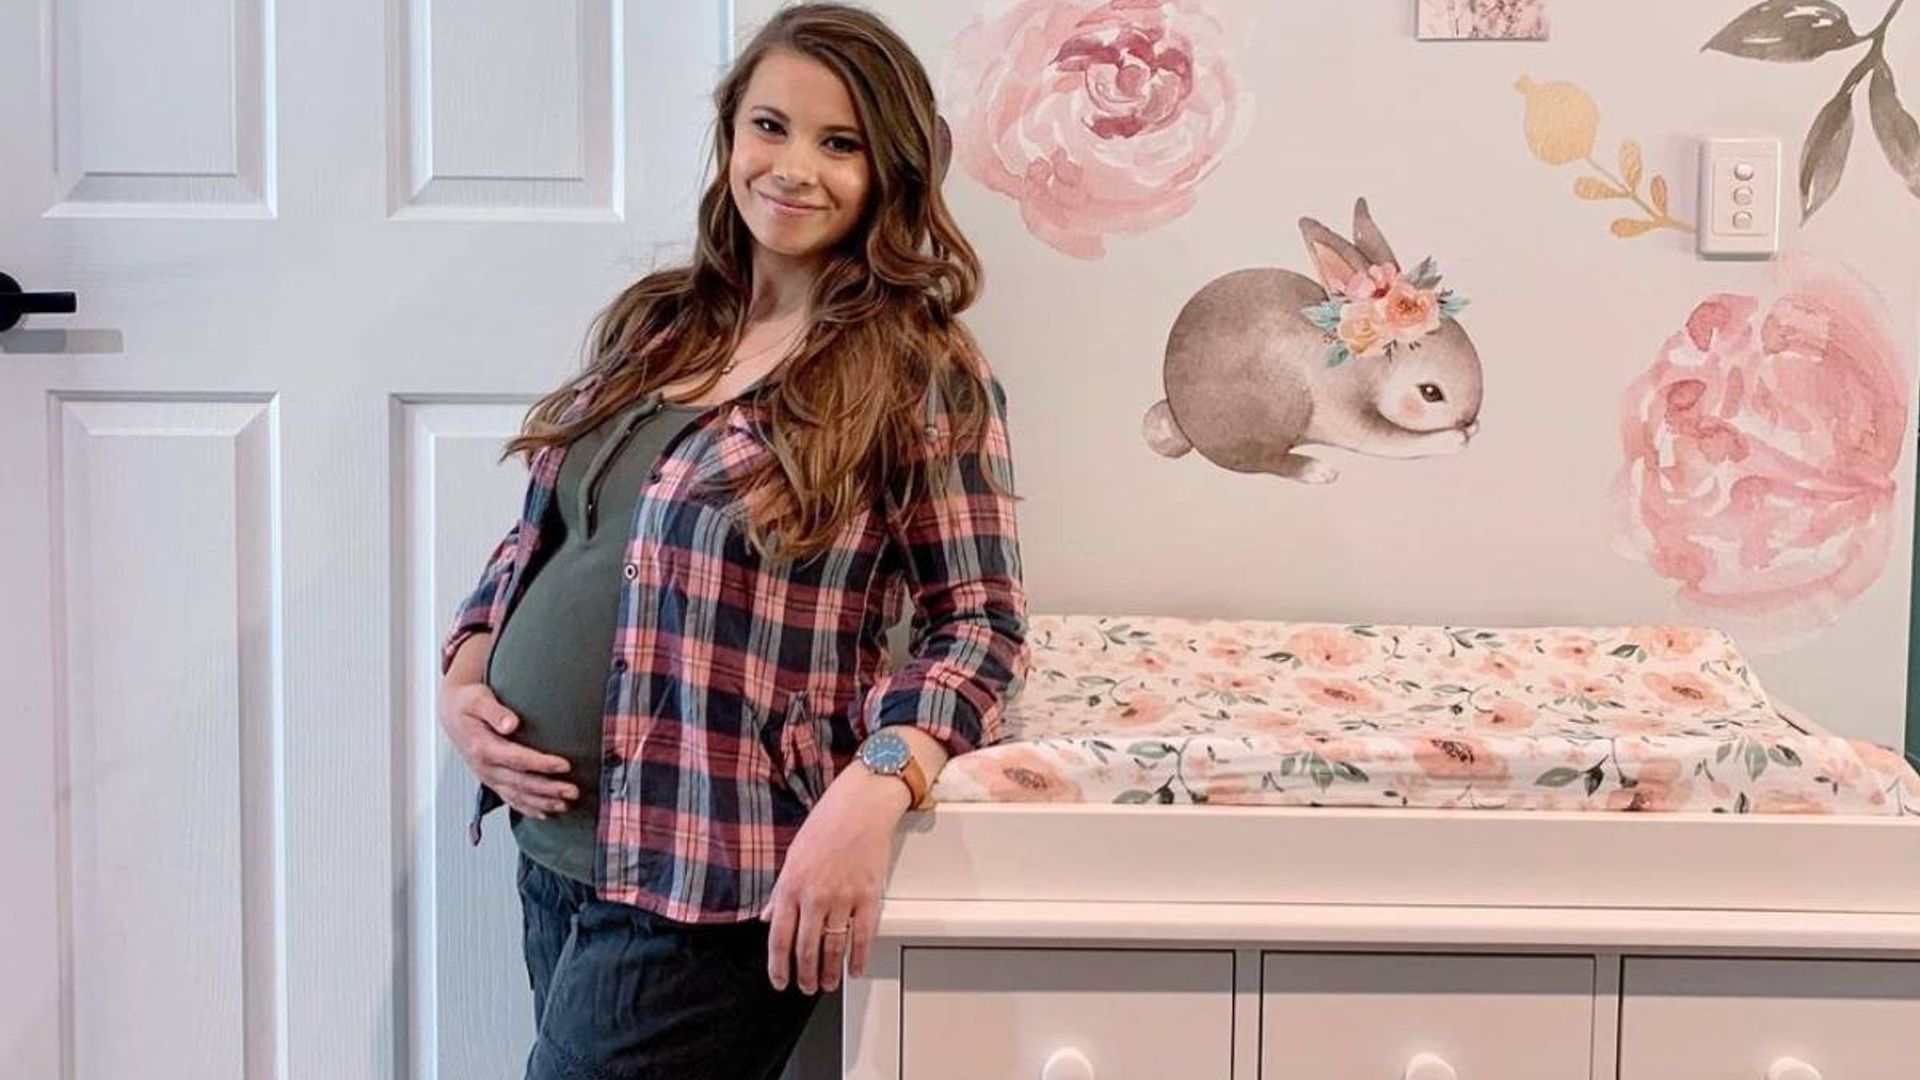 Pregnant Bindi Irwin shares unexpected baby photo - and fans react